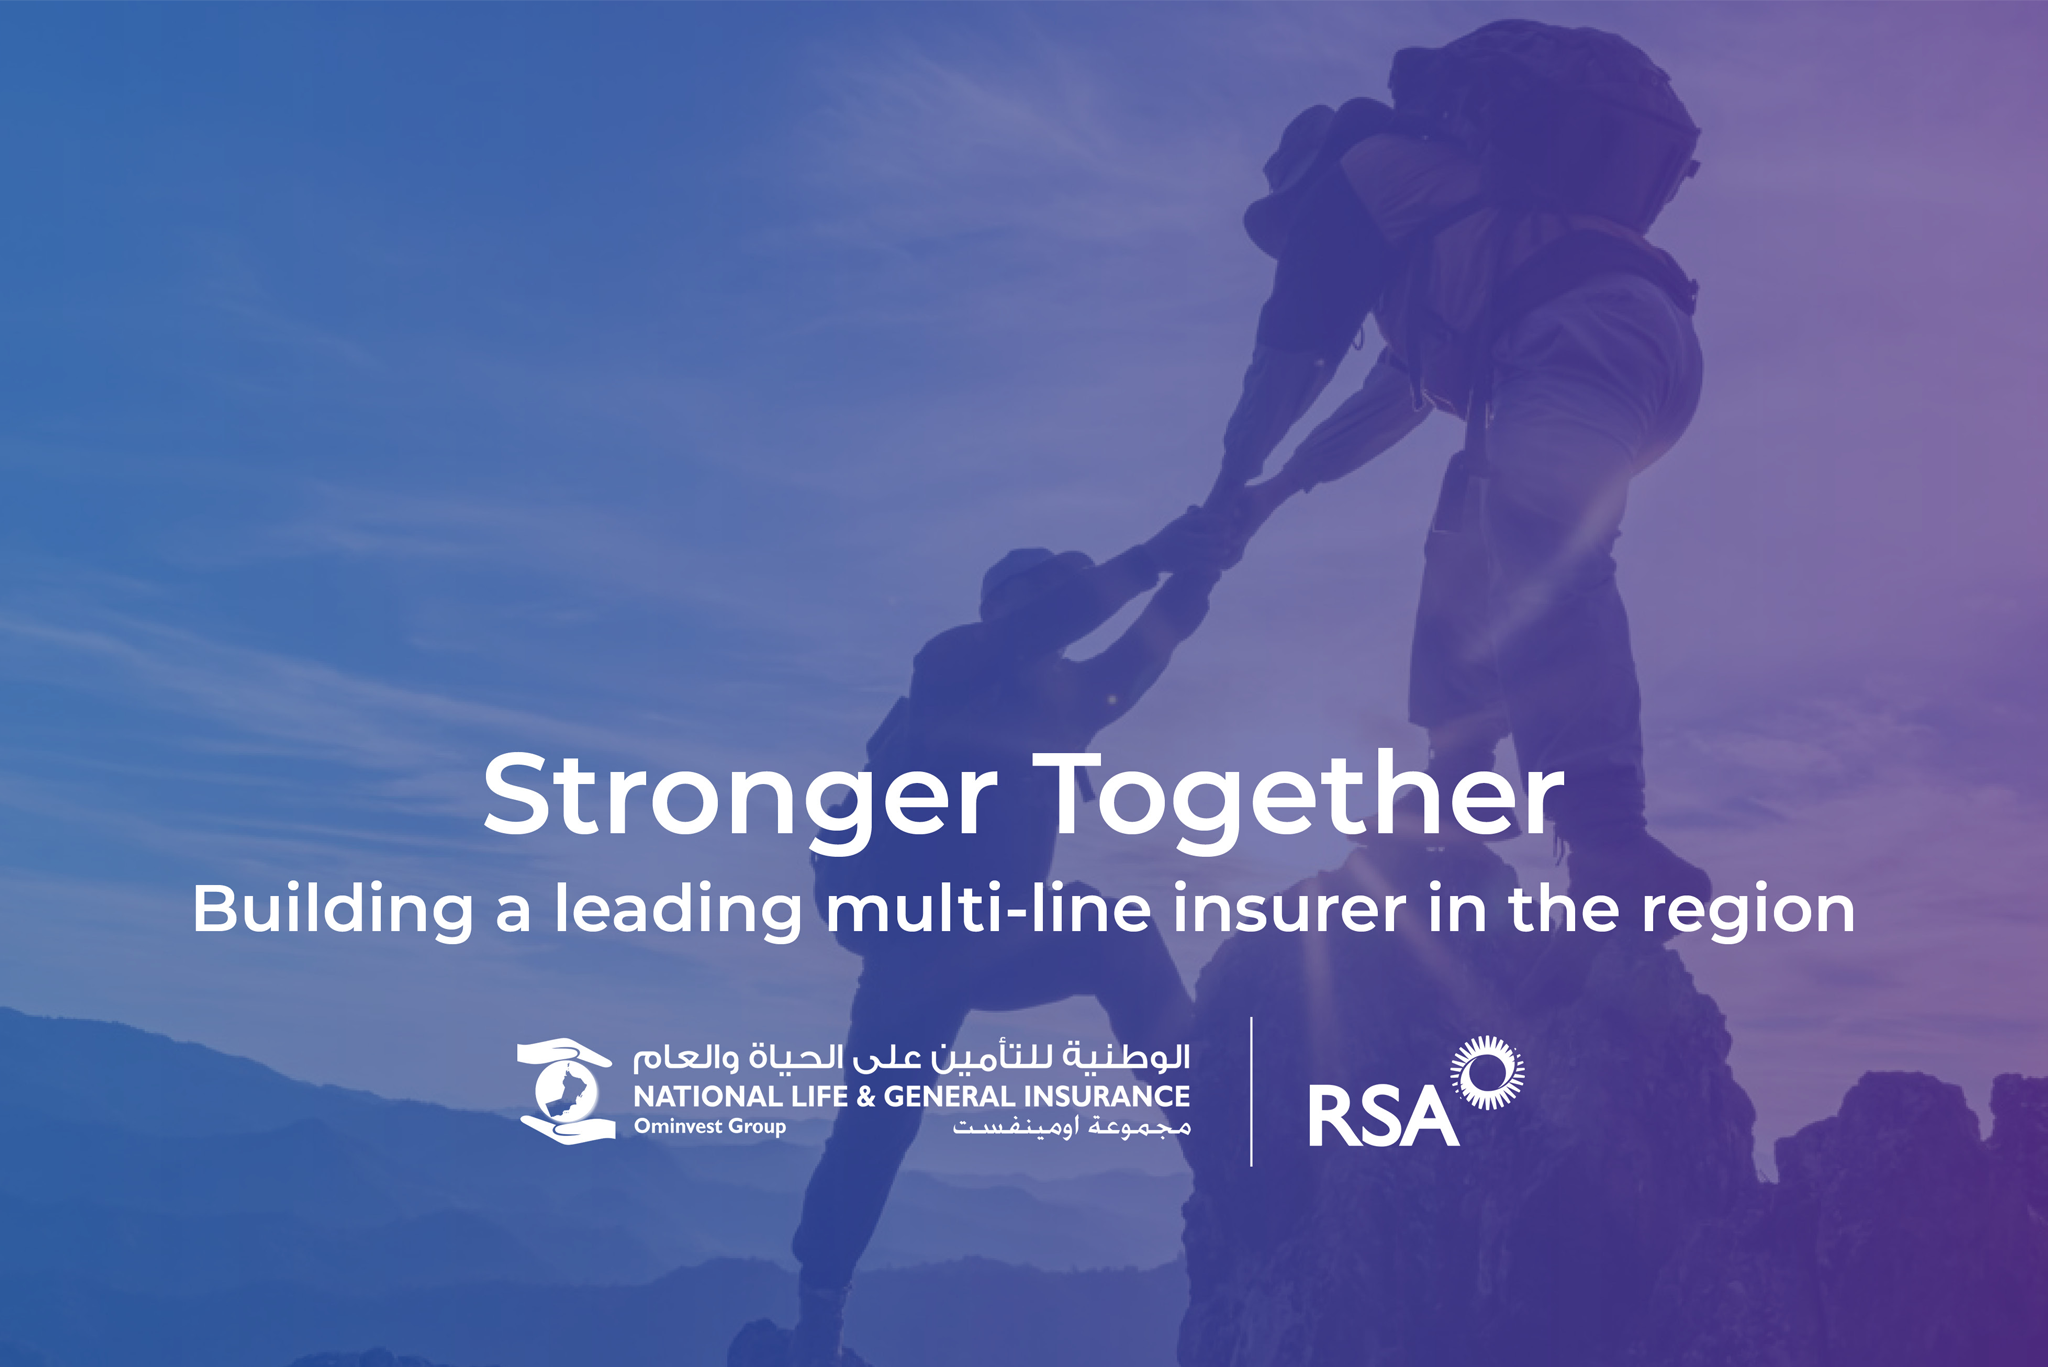 OMINVEST’s Insurance Subsidiary, NLGIC, comes together with RSA Middle East to build a Leading Multi-Line Insurance Group in the Region